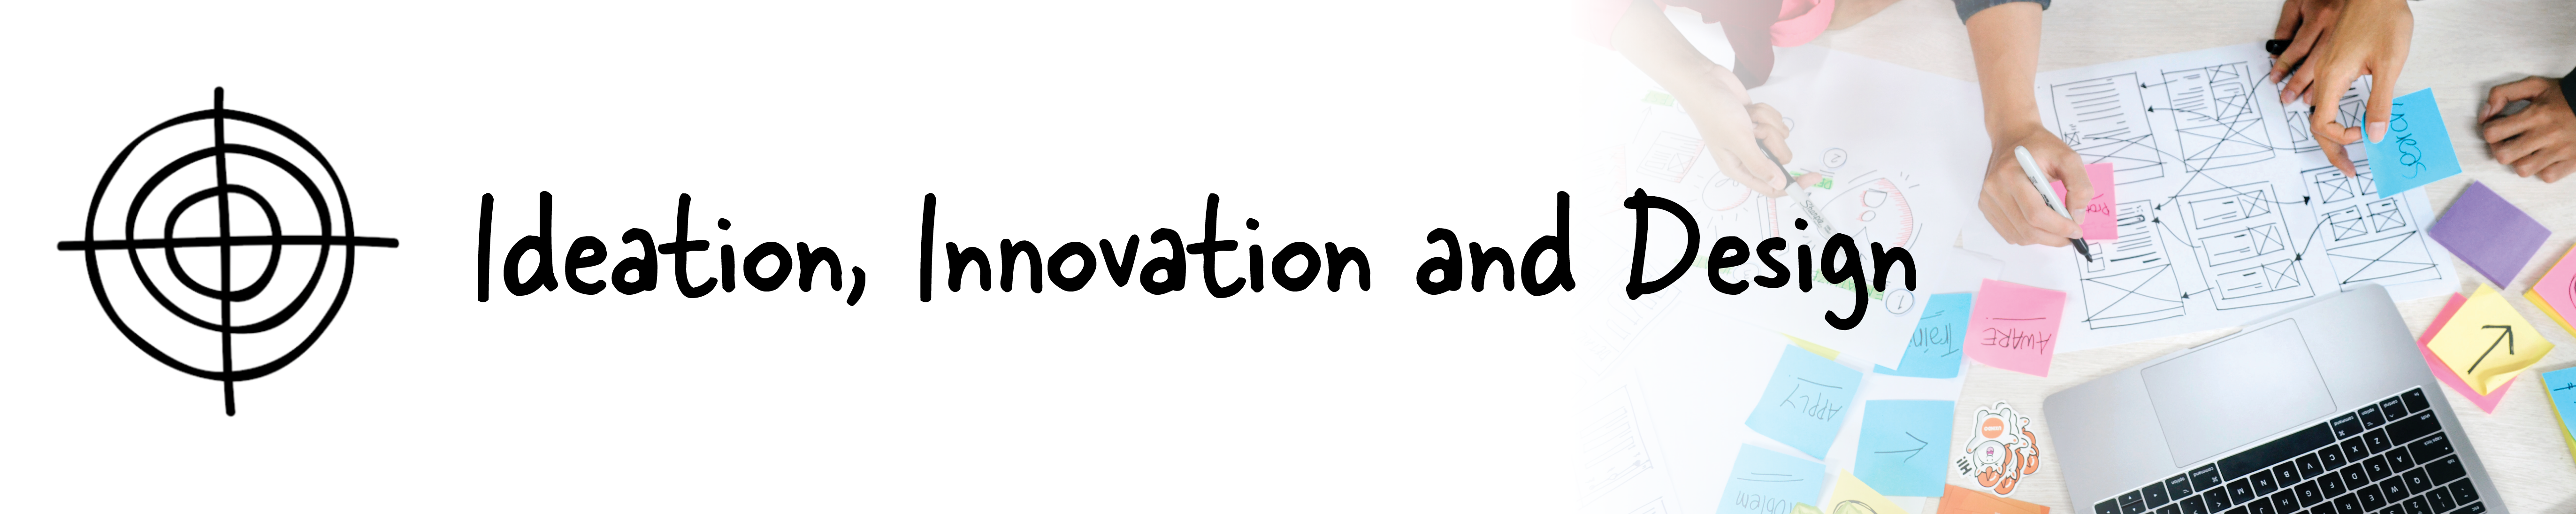 Ideation, Innovation and Design